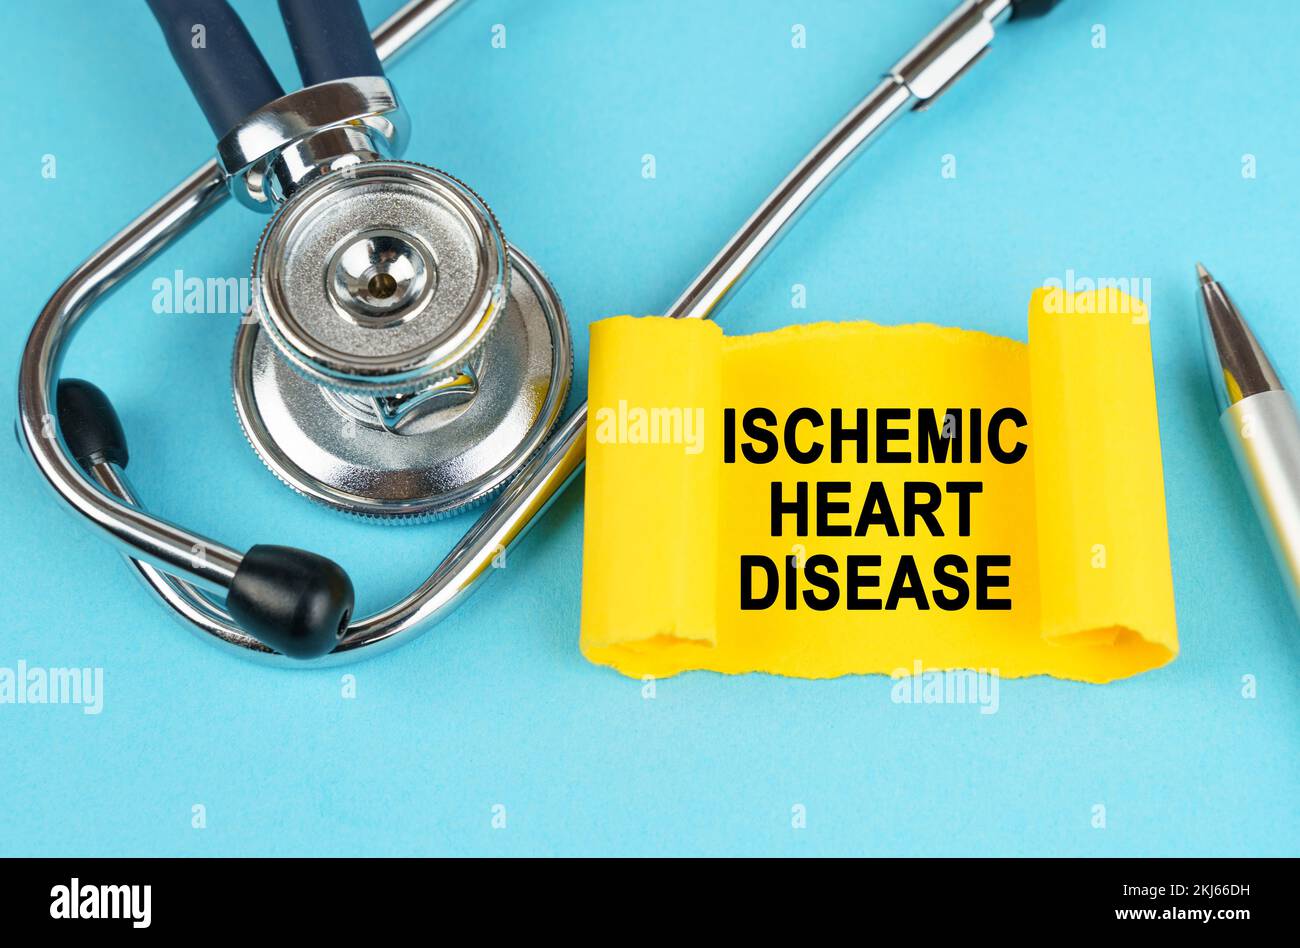 Medical concept. On the blue surface there is a stethoscope, a pen and a yellow sticker with the inscription - Ischemic Heart Disease Stock Photo